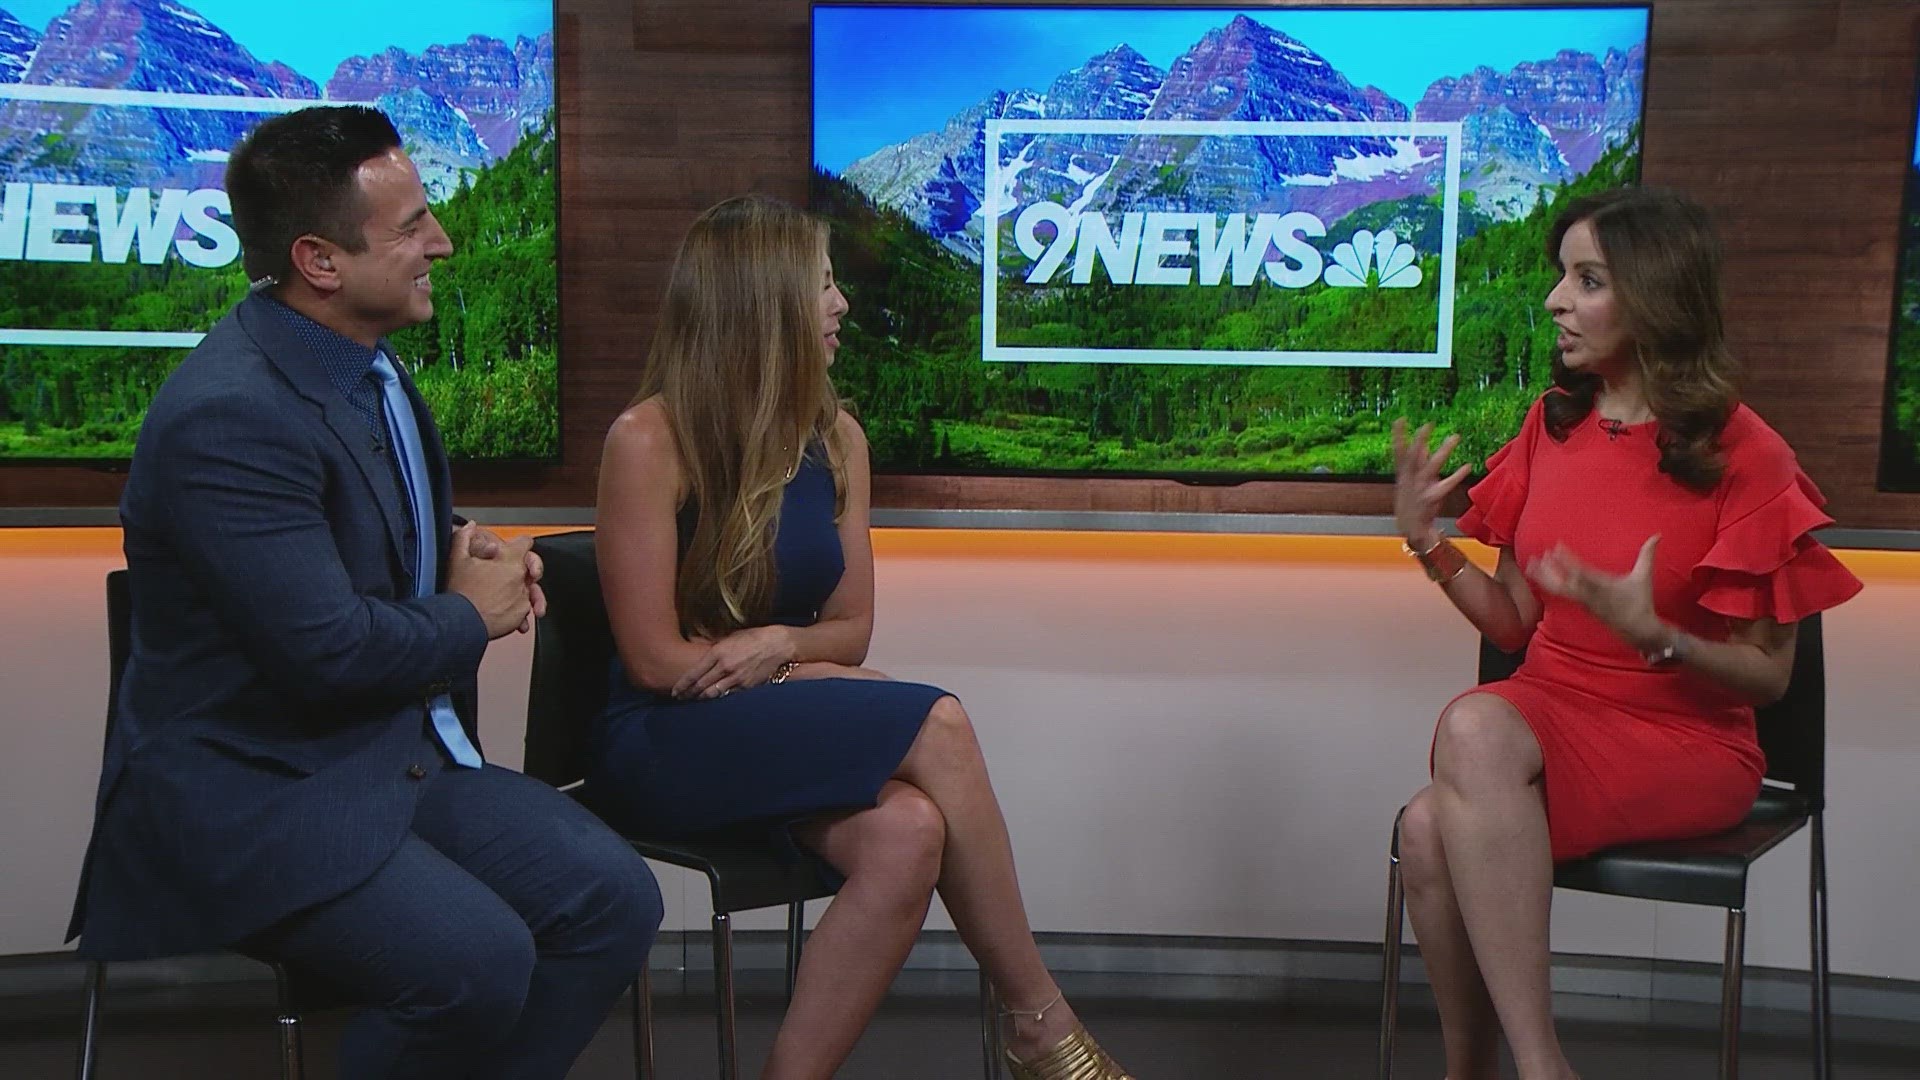 9NEWS Health Expert Dr. Payal Kohli discusses how summer heat can have an impact on your health if you don't take precautions.